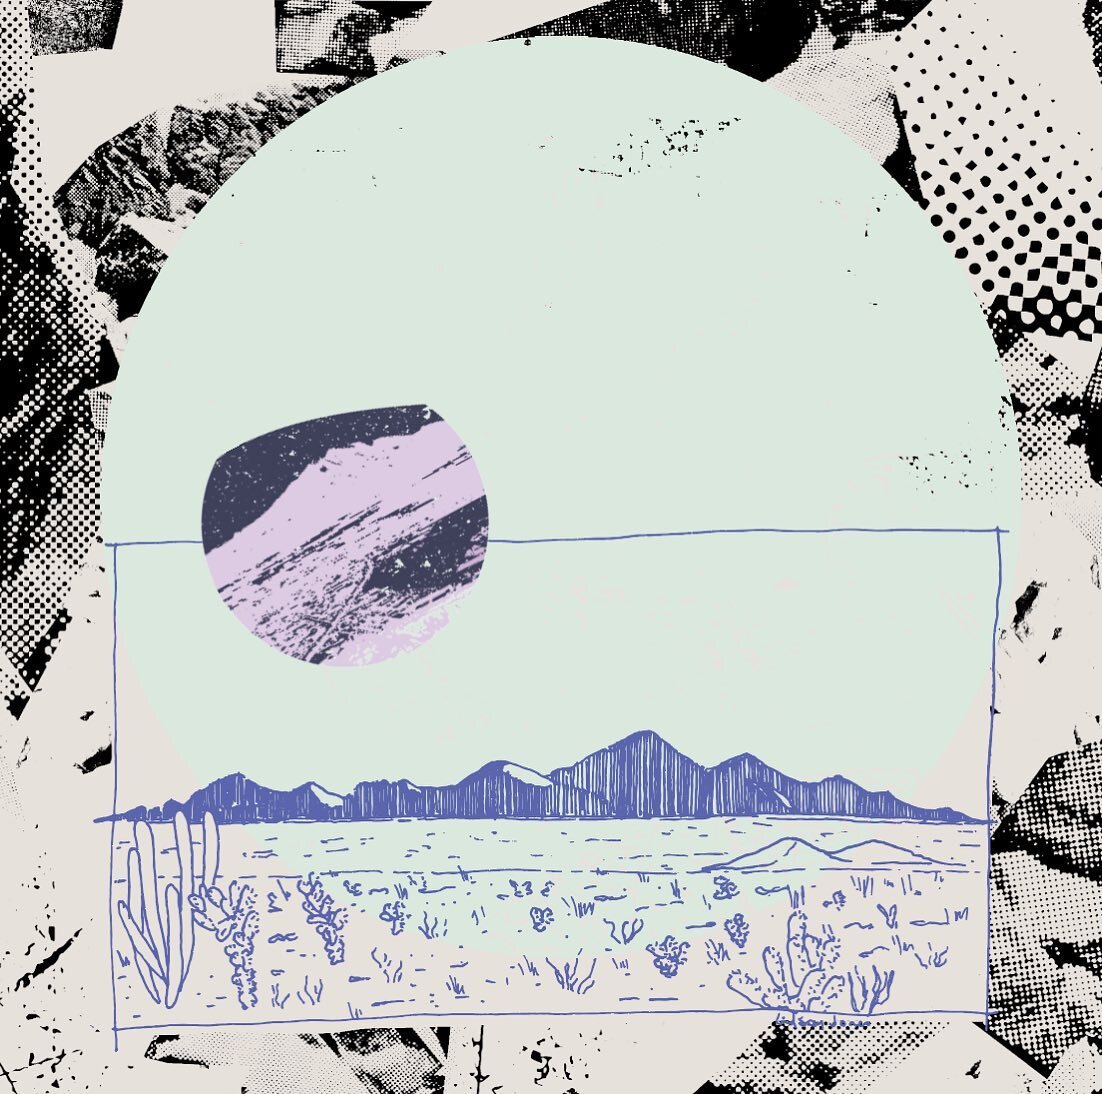 Finally got to escape for some warm desert days this weekend (not this desert though). This one comes from the AZ/MX border from a trip last year.
-
#desertlandscape #borderlands #arizonamexico #femaleillustrator #collage
-
[image ID: line drawing of